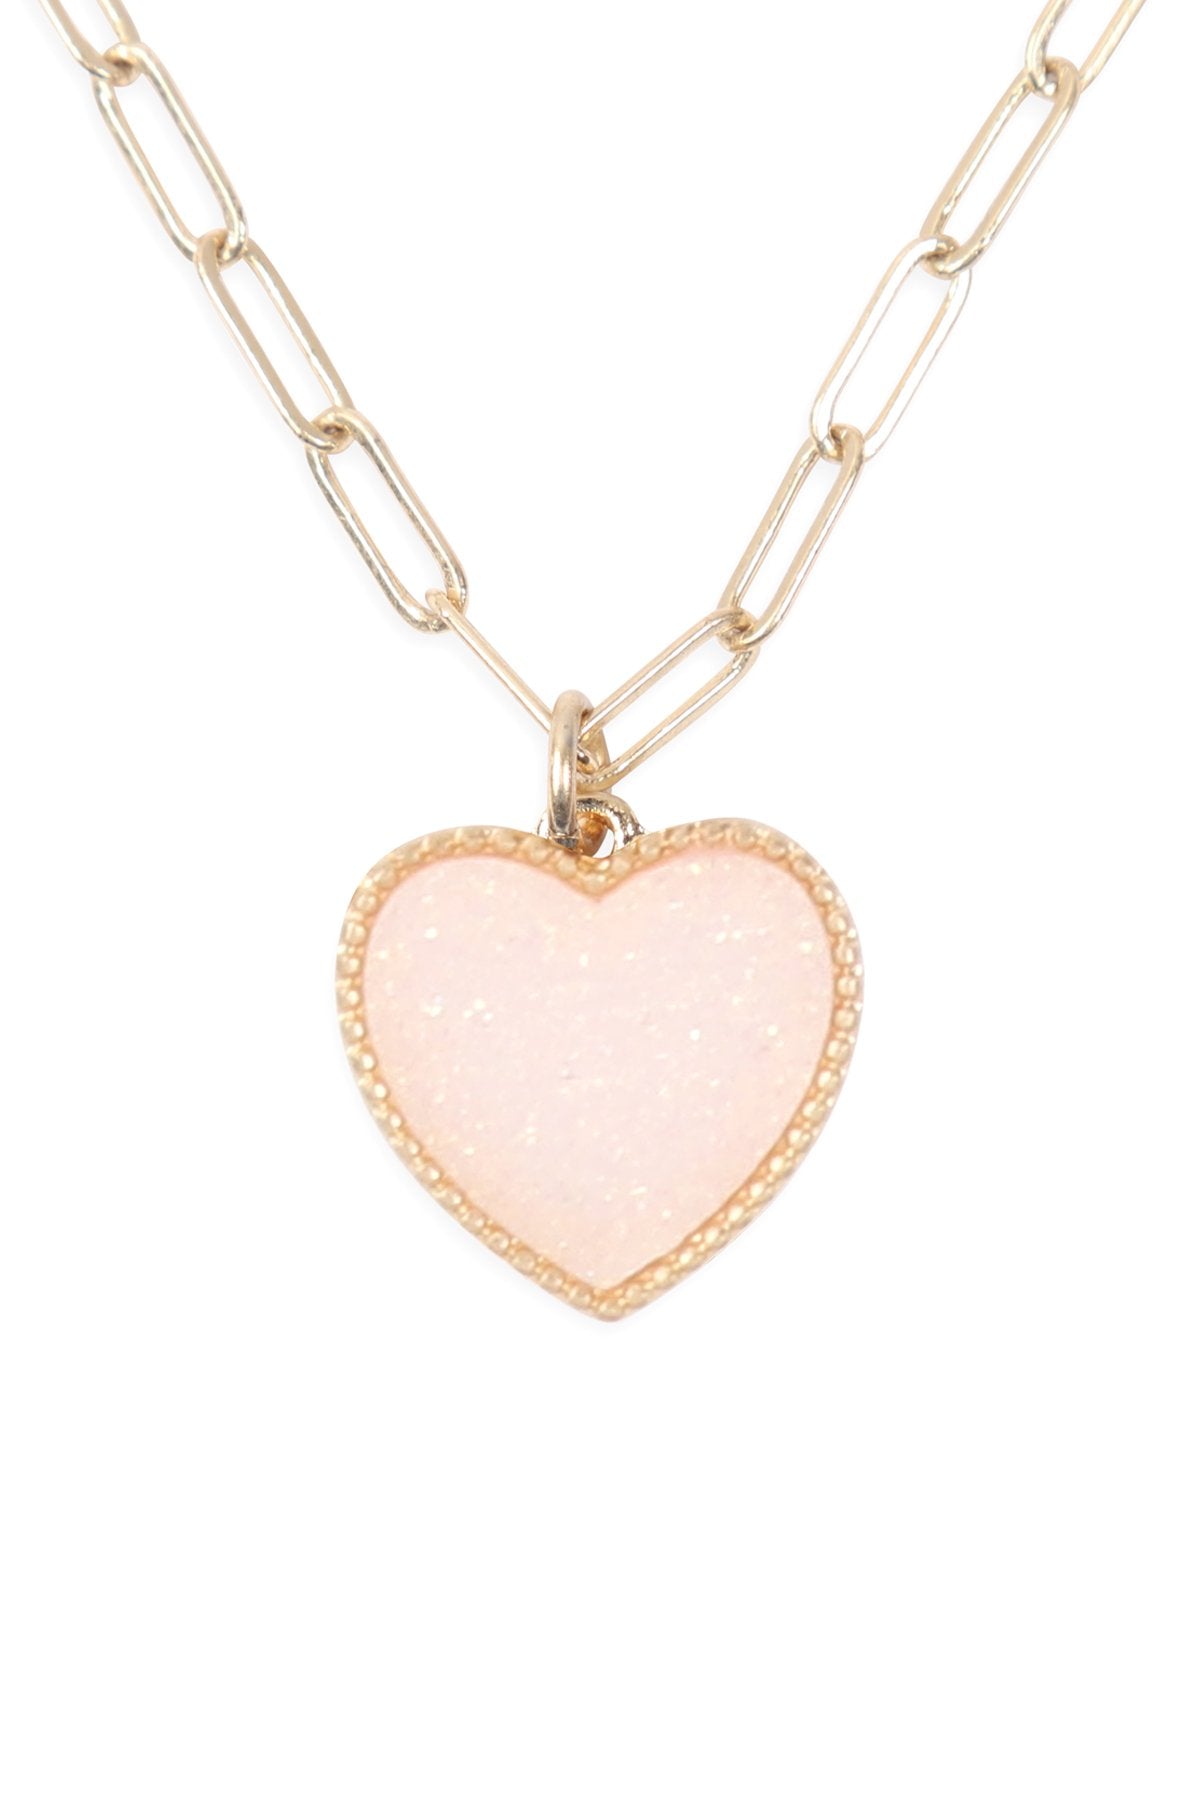 Jnb009 - Two Layered Druzy Heart Necklace - LOLA LUXE